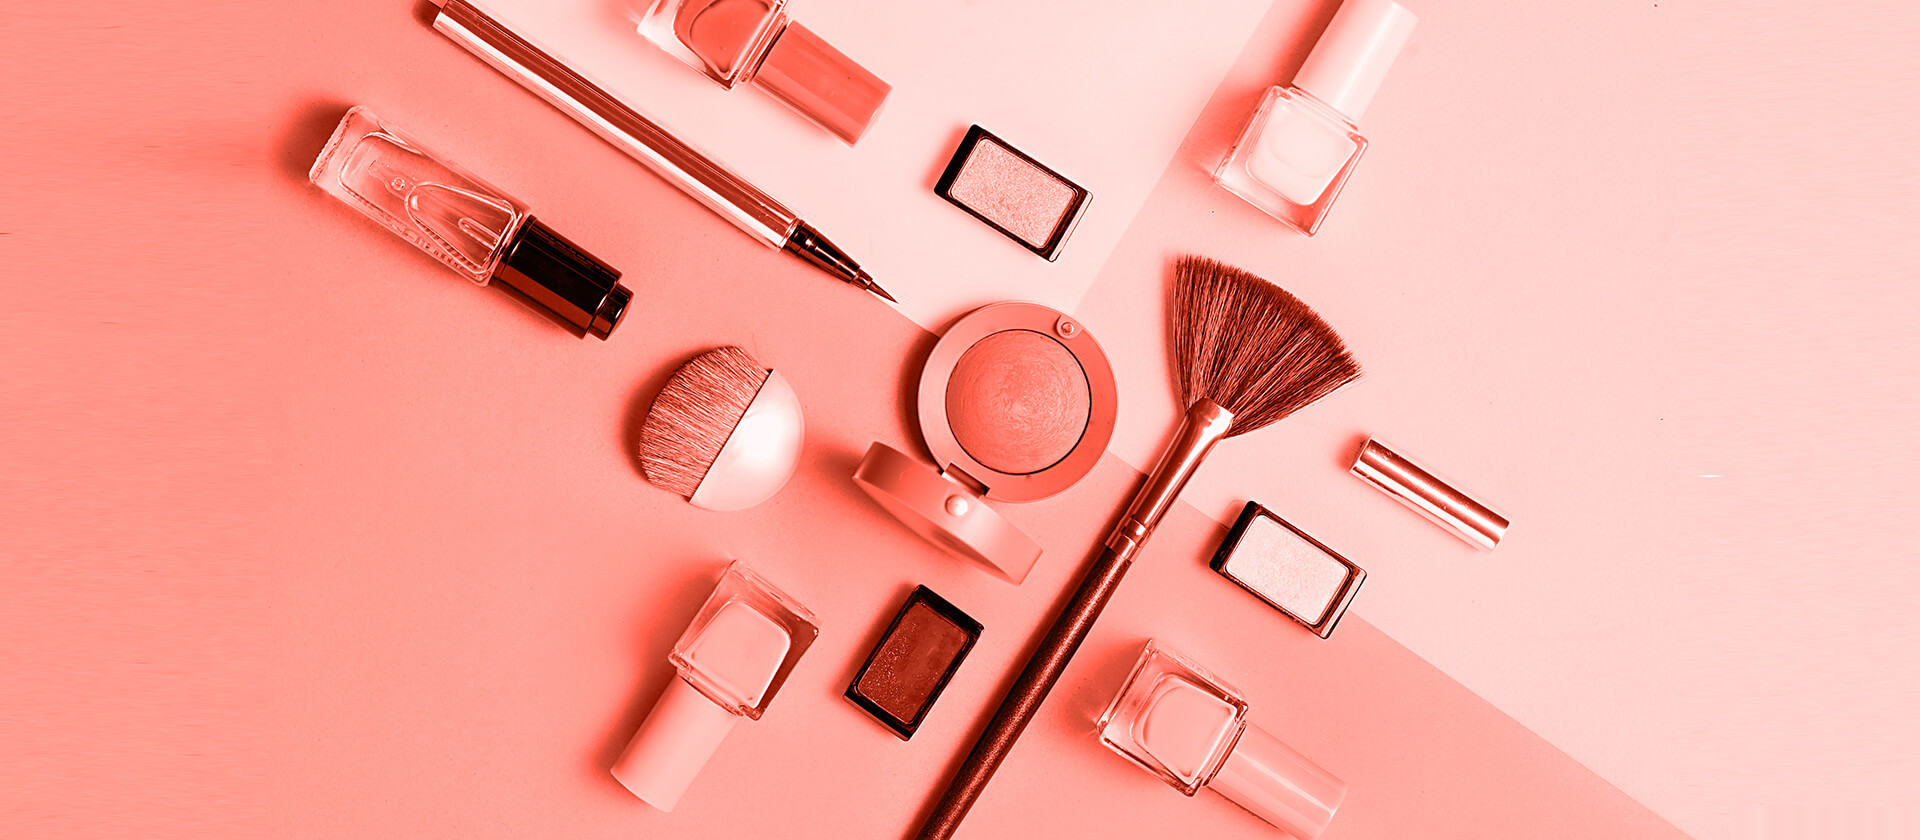 How To Make Your Own Cosmetic Brand